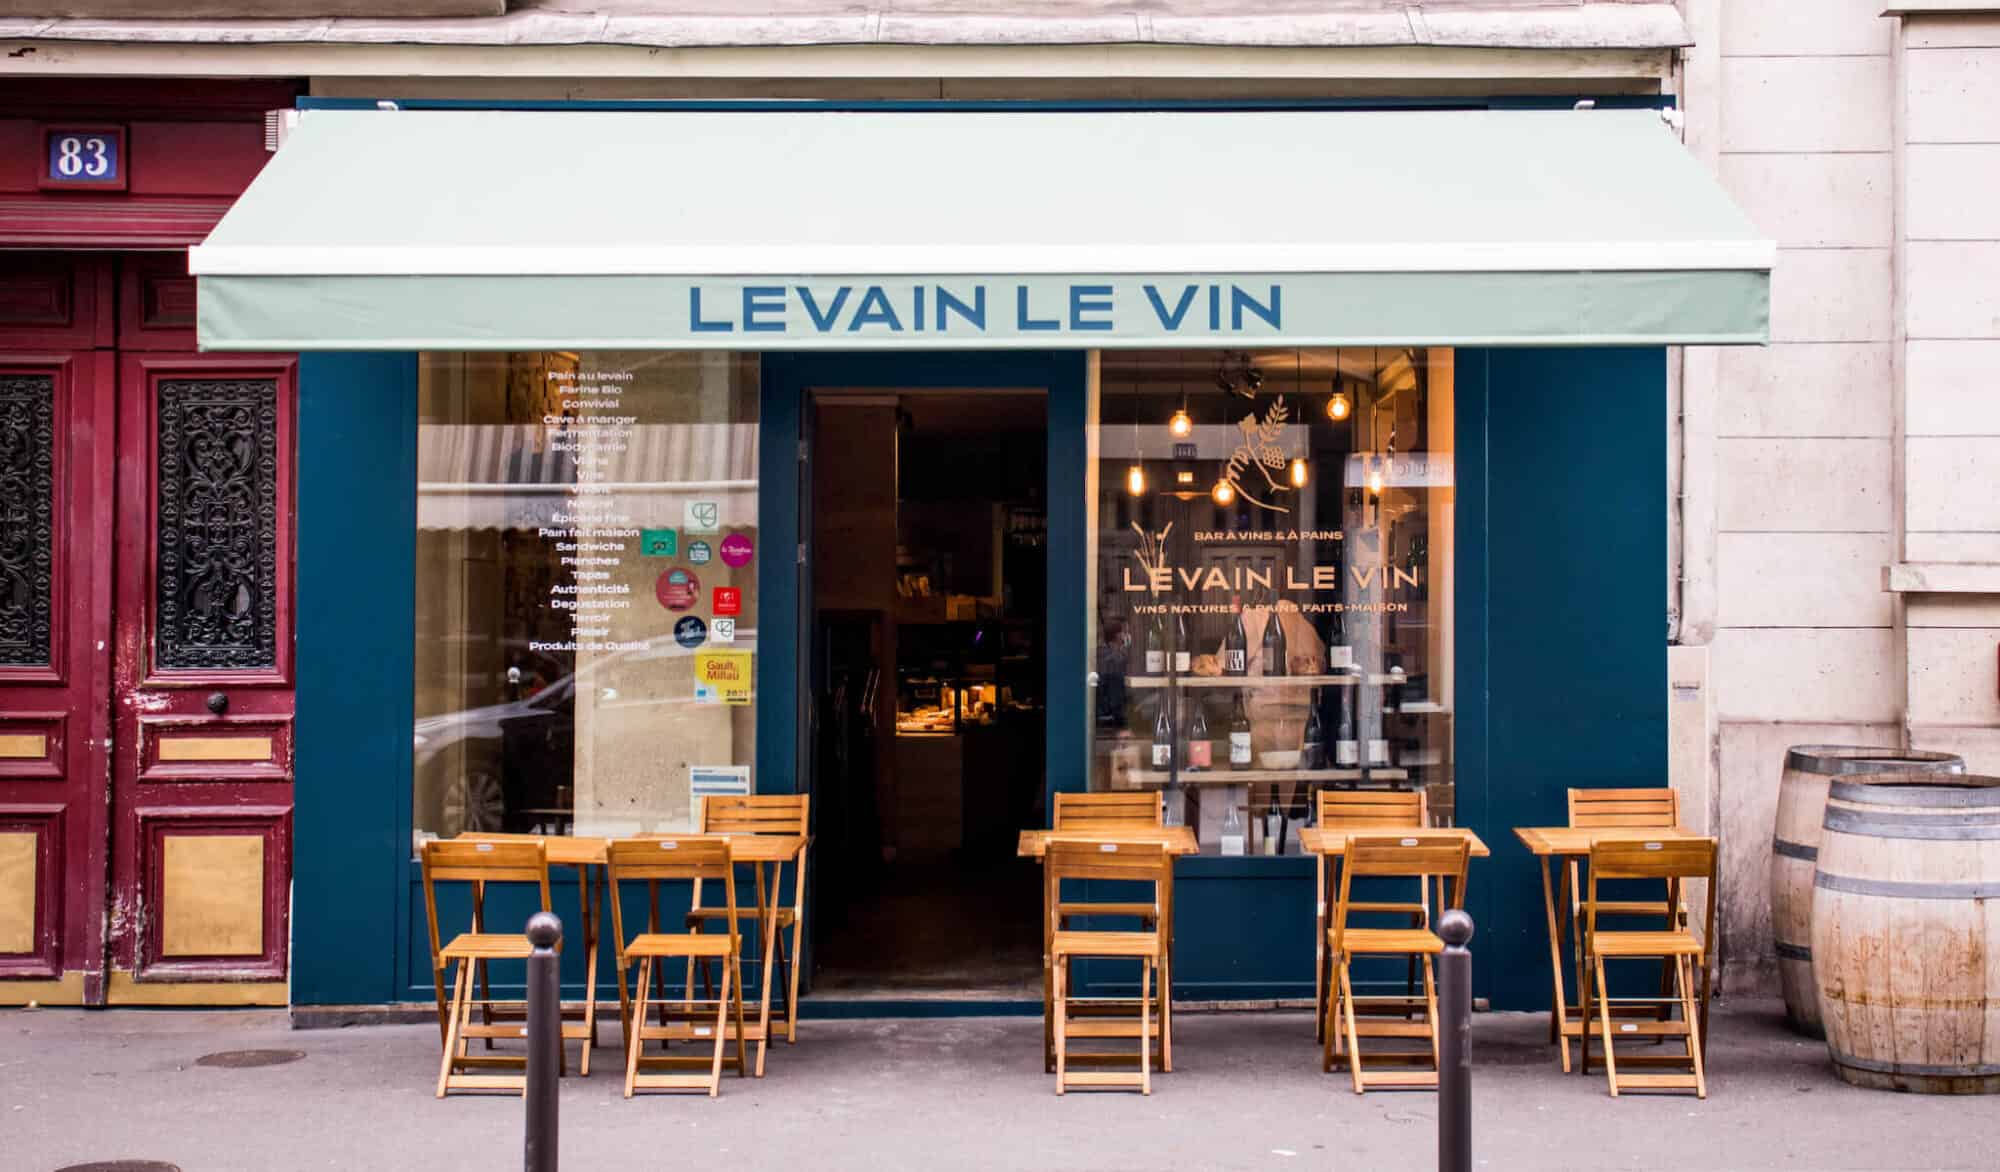 A wine bar in Paris called Levain Le Vin with its blue walled storefront, wooden chairs, and light blue awning.